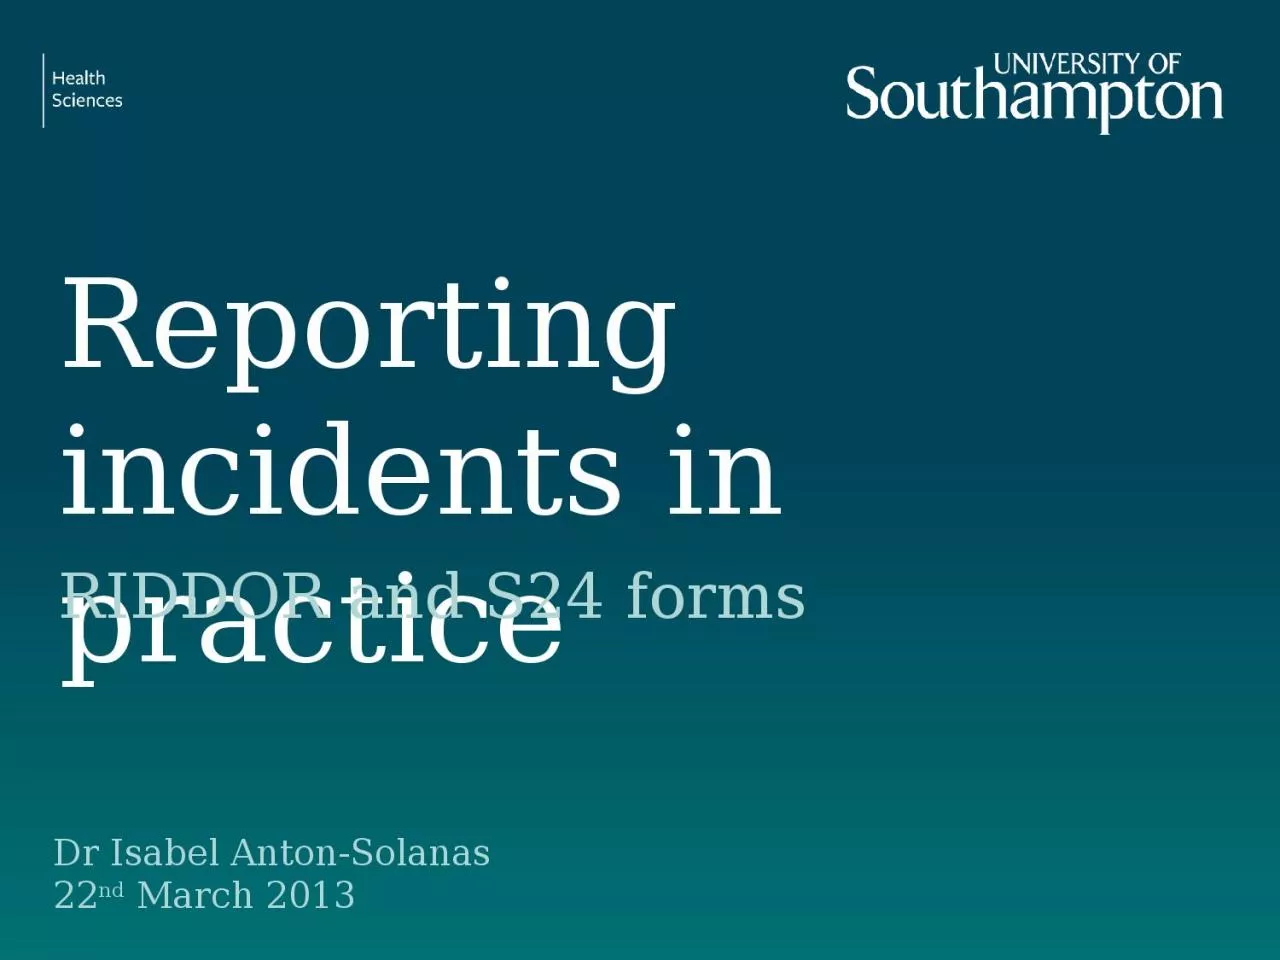 Reporting incidents in practice